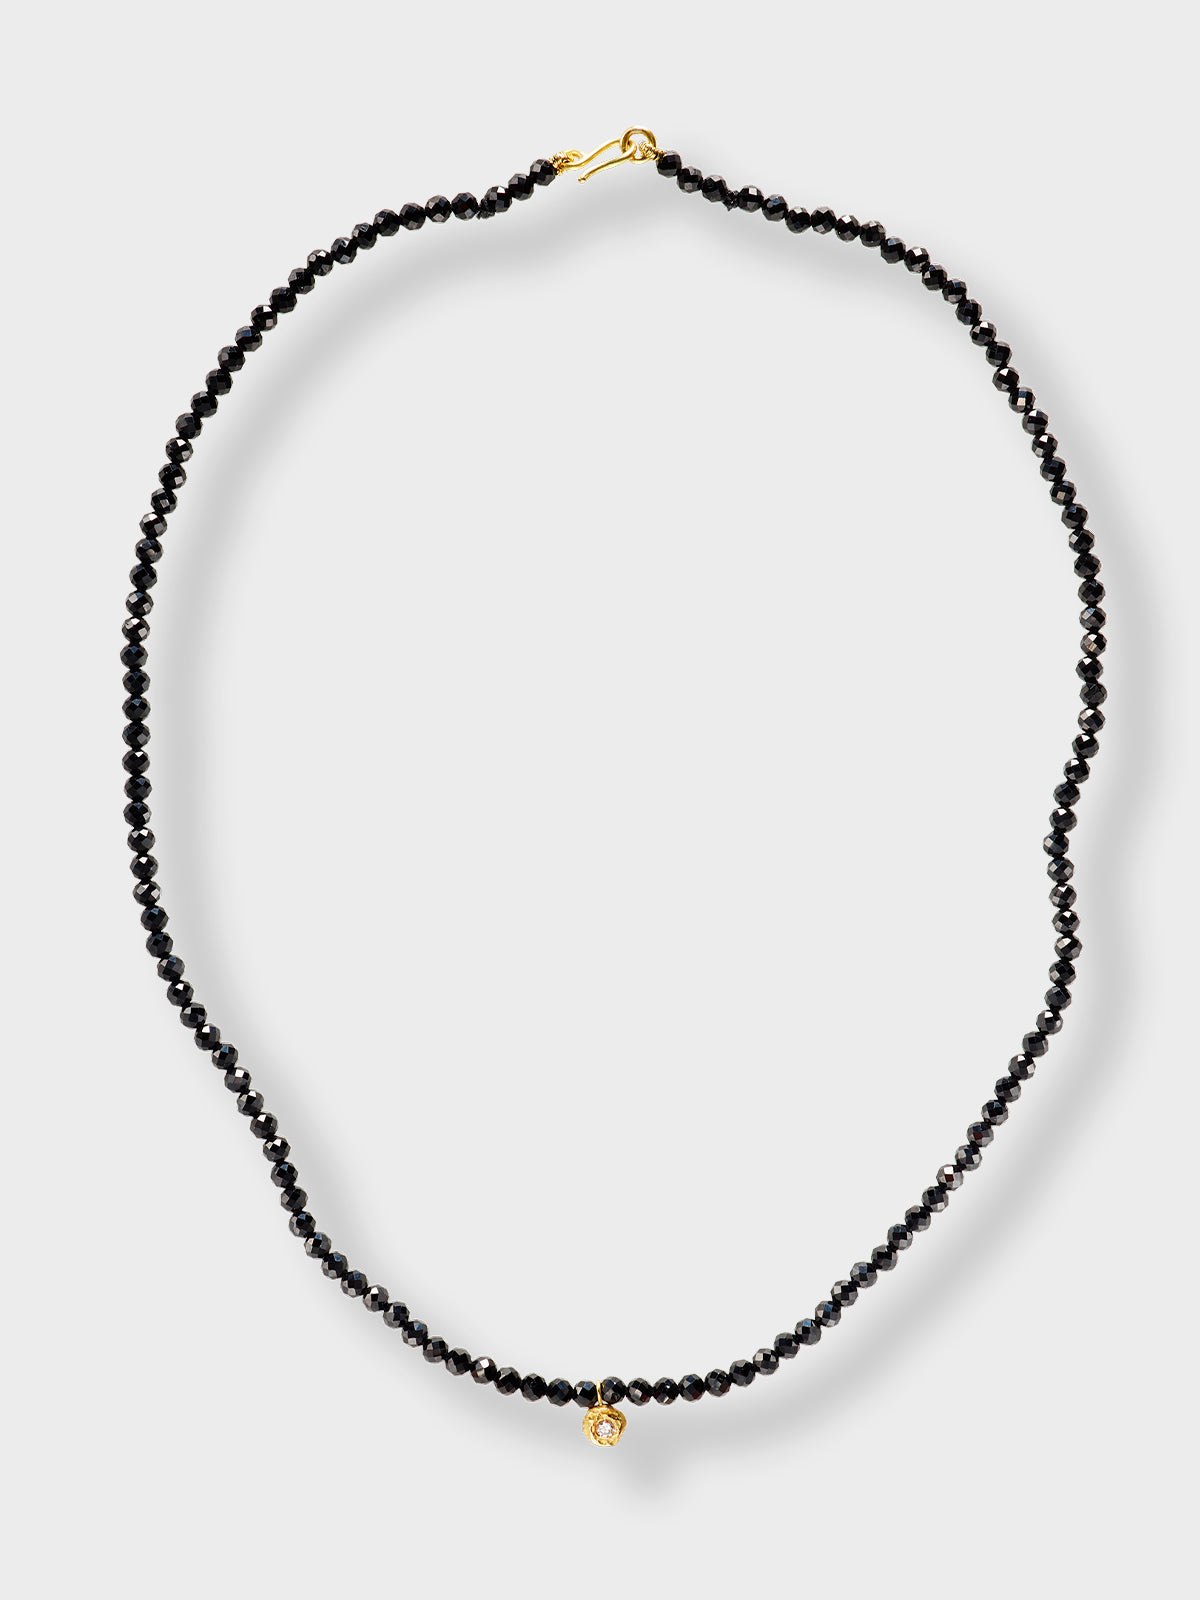 Elhanati - Black Orchid Lucinda One Necklace in 18K Yellow Gold